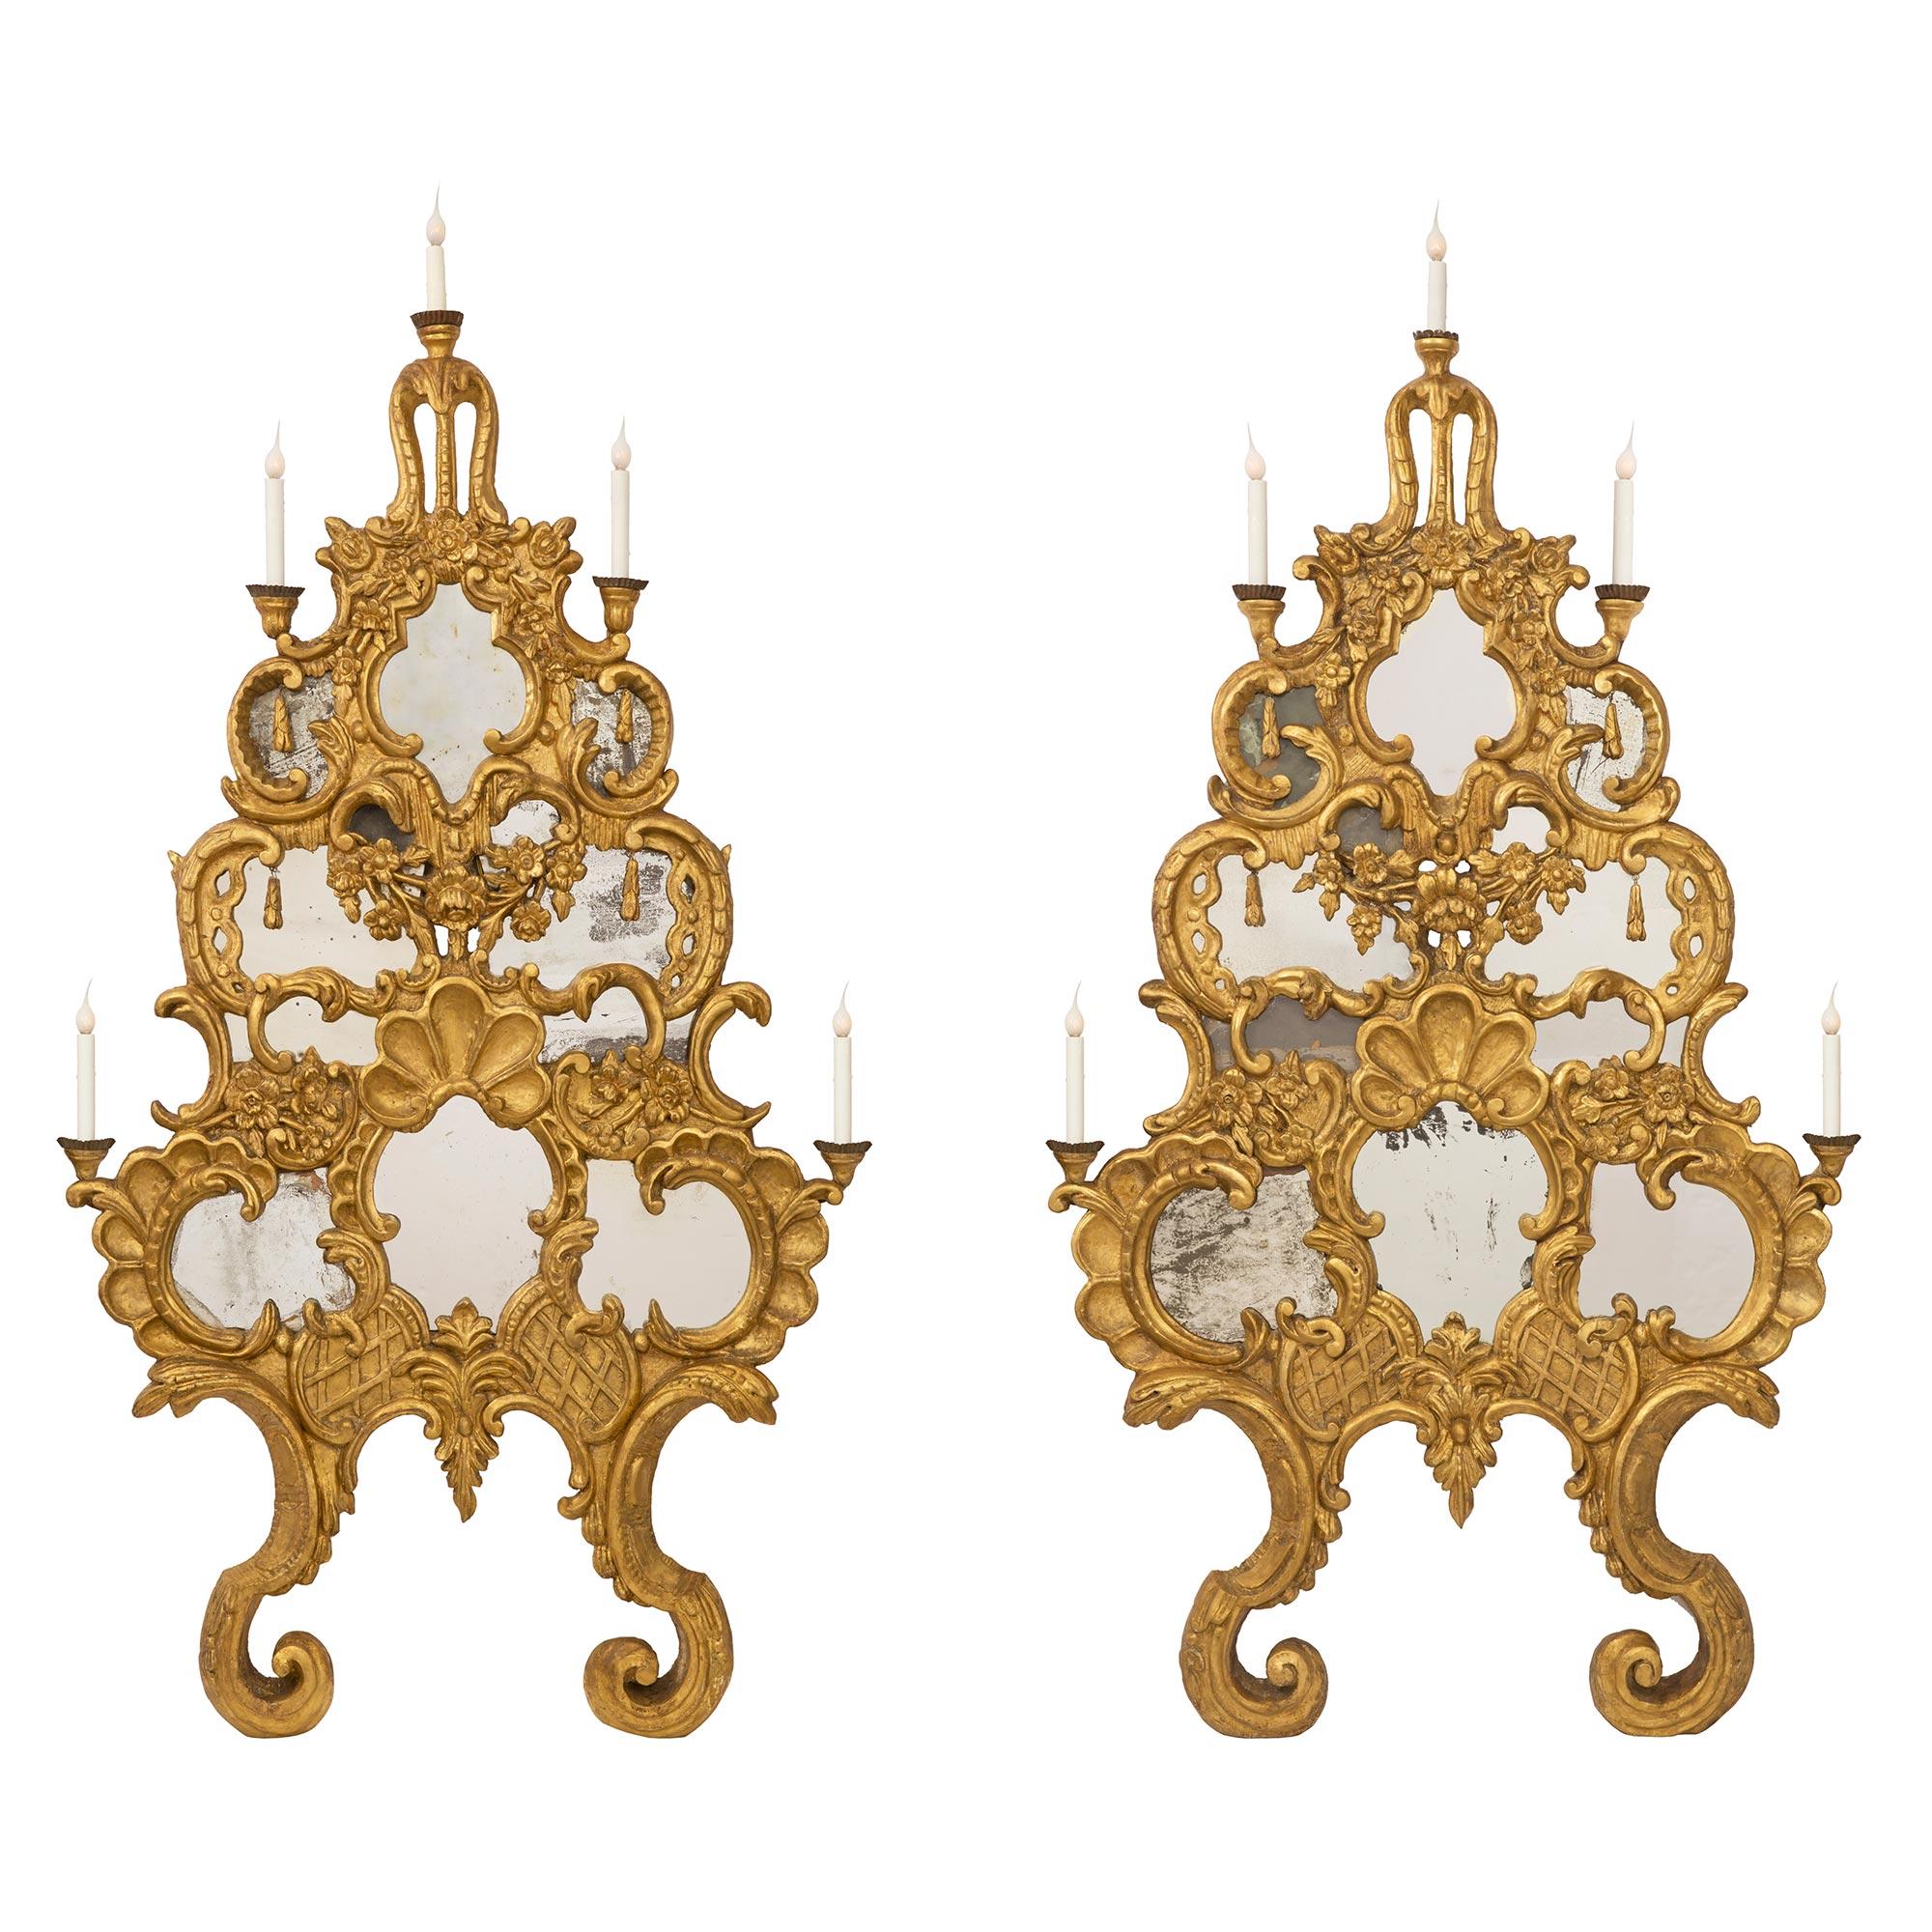 Pair of Italian Mid-18th Century, Mirrored Giltwood Baroque Sconces In Good Condition For Sale In West Palm Beach, FL